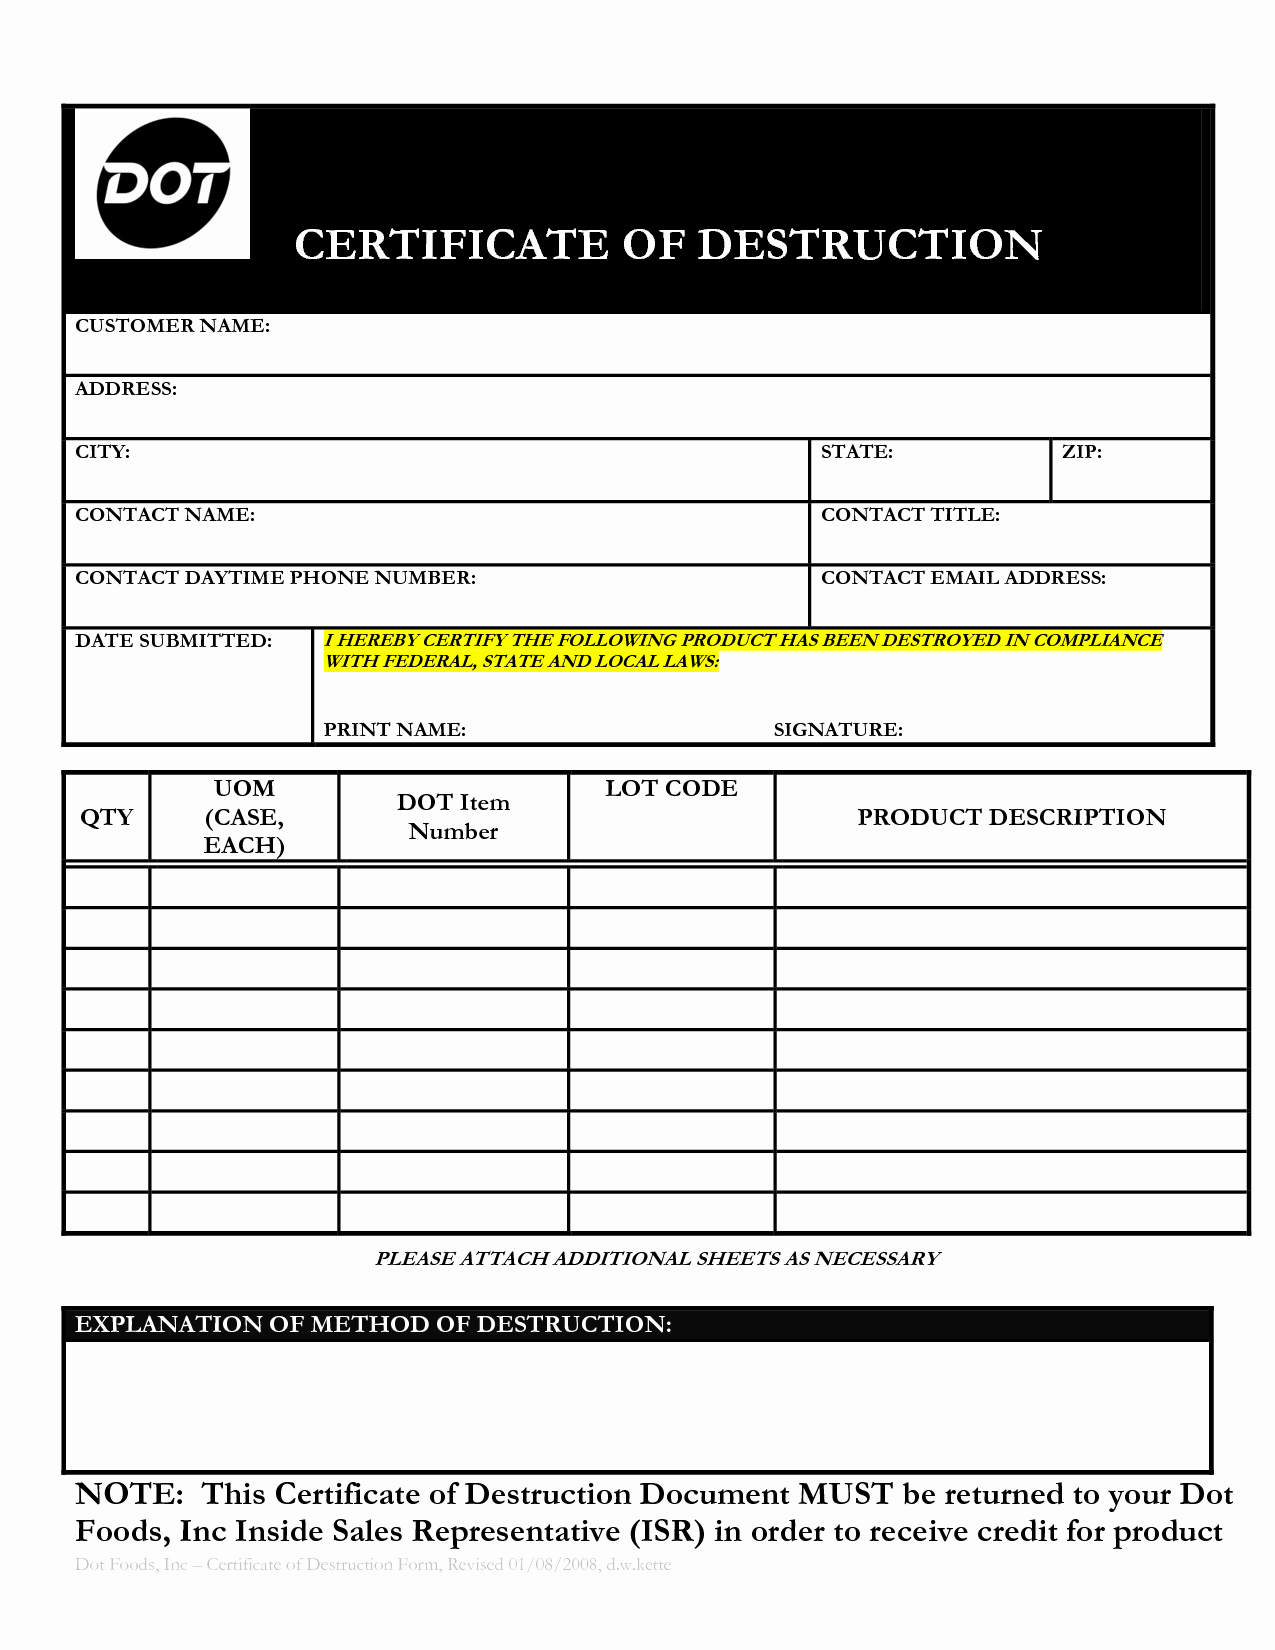 Certificate Of Destruction Sample Awesome Records Destruction Log to Pin On Pinterest